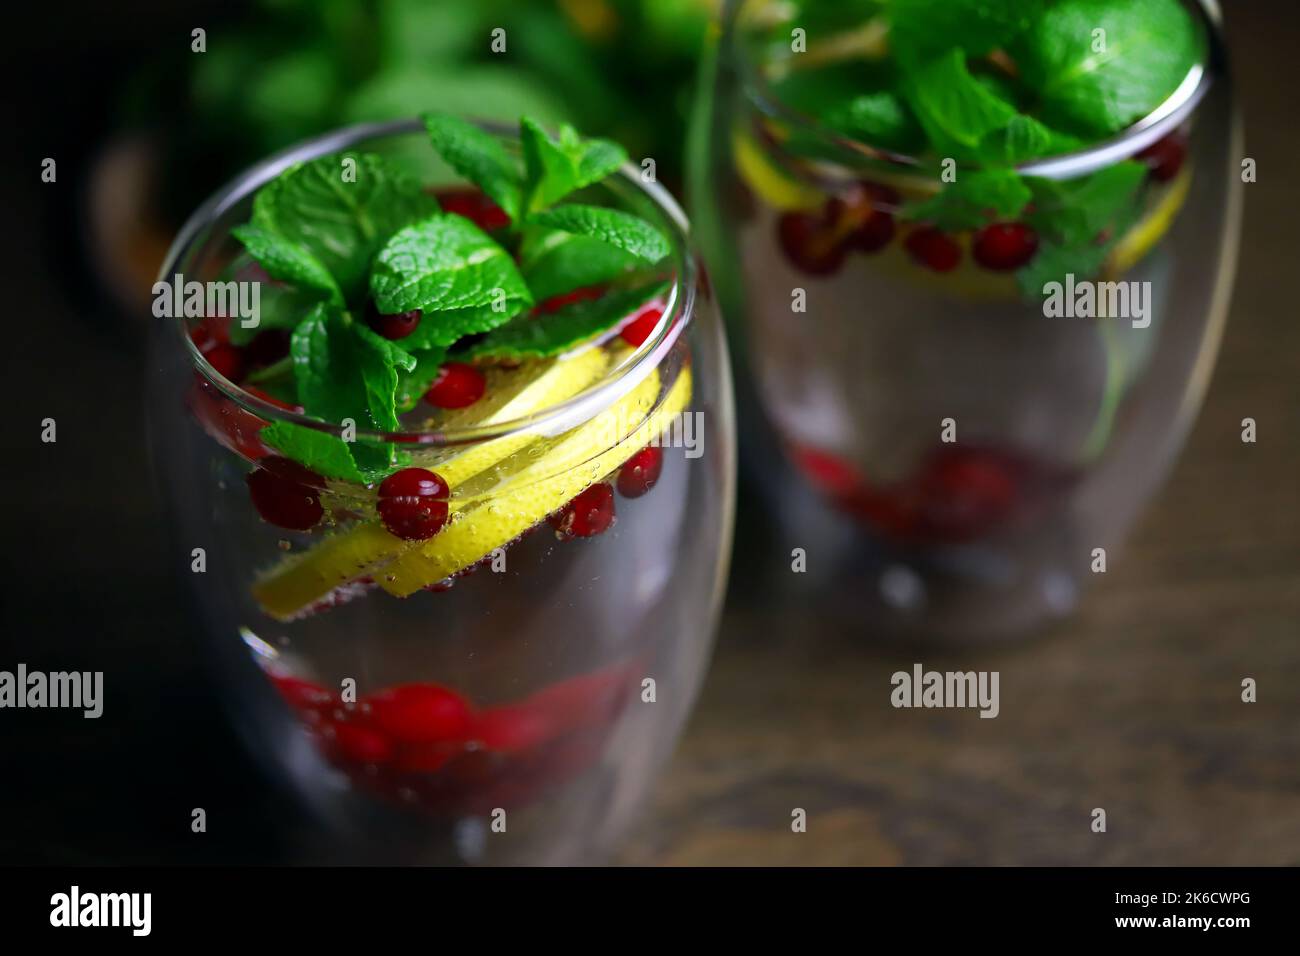 Detox drink with cranberries, mint and lemon in a glass on a dark background. Healthy beverage. Stock Photo